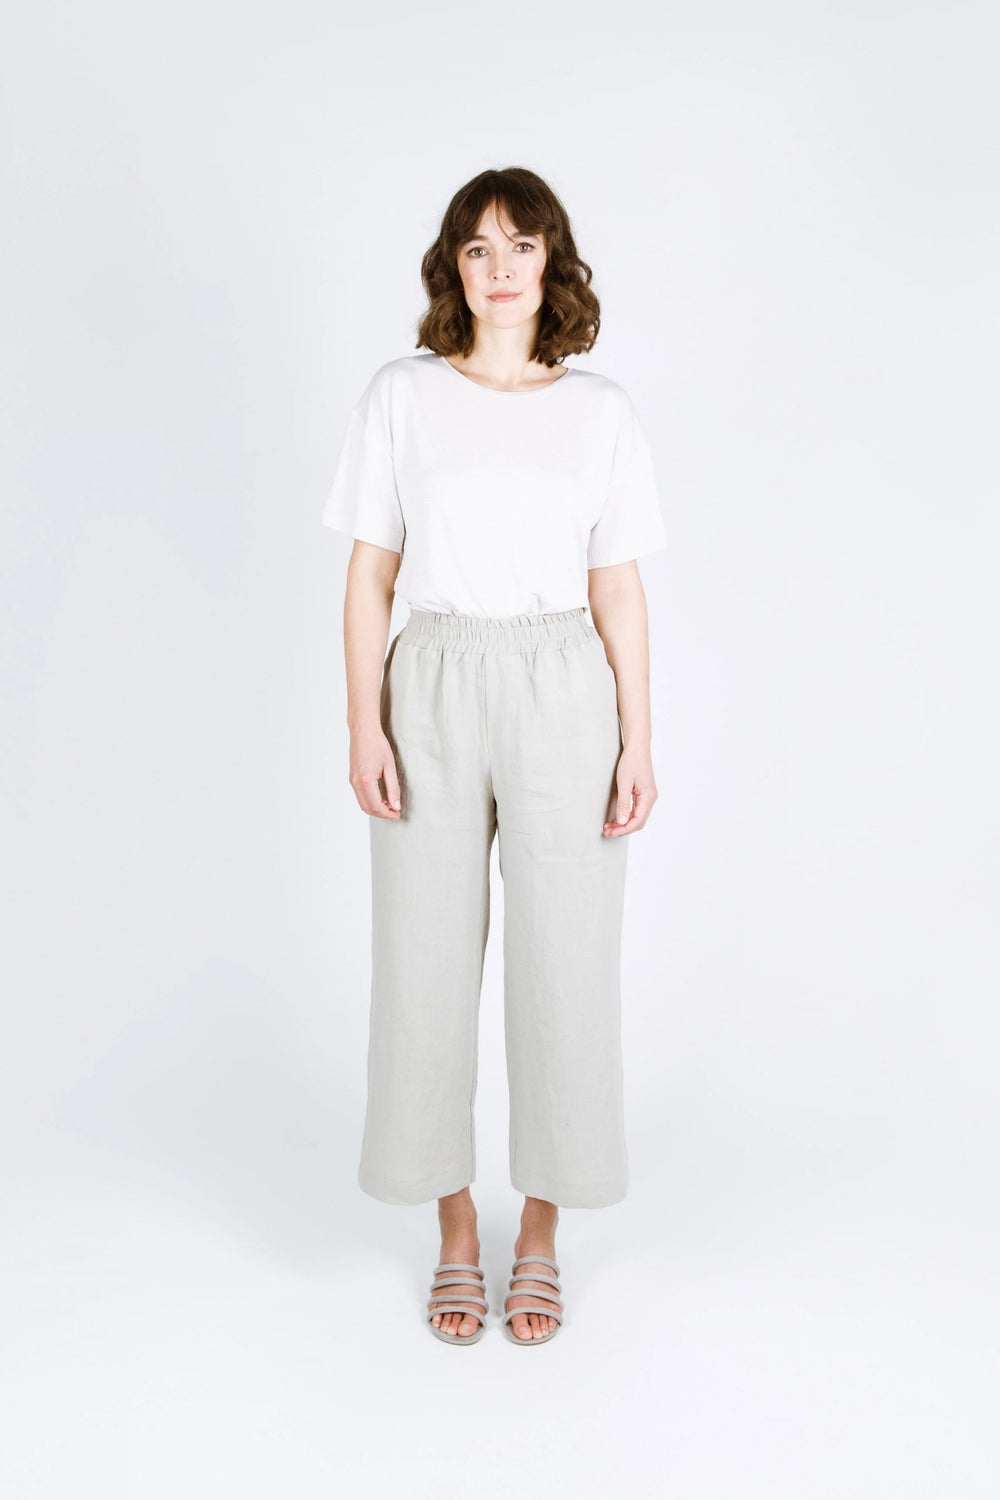 Woman wearing the Tula Pants sewing pattern from Papercut Patterns on The Fold Line. A trouser pattern made in linen, cotton, sweatshirting and blended fabrics, featuring an elasticated waistband, side pockets, relaxed fit, wide leg, and cropped length.